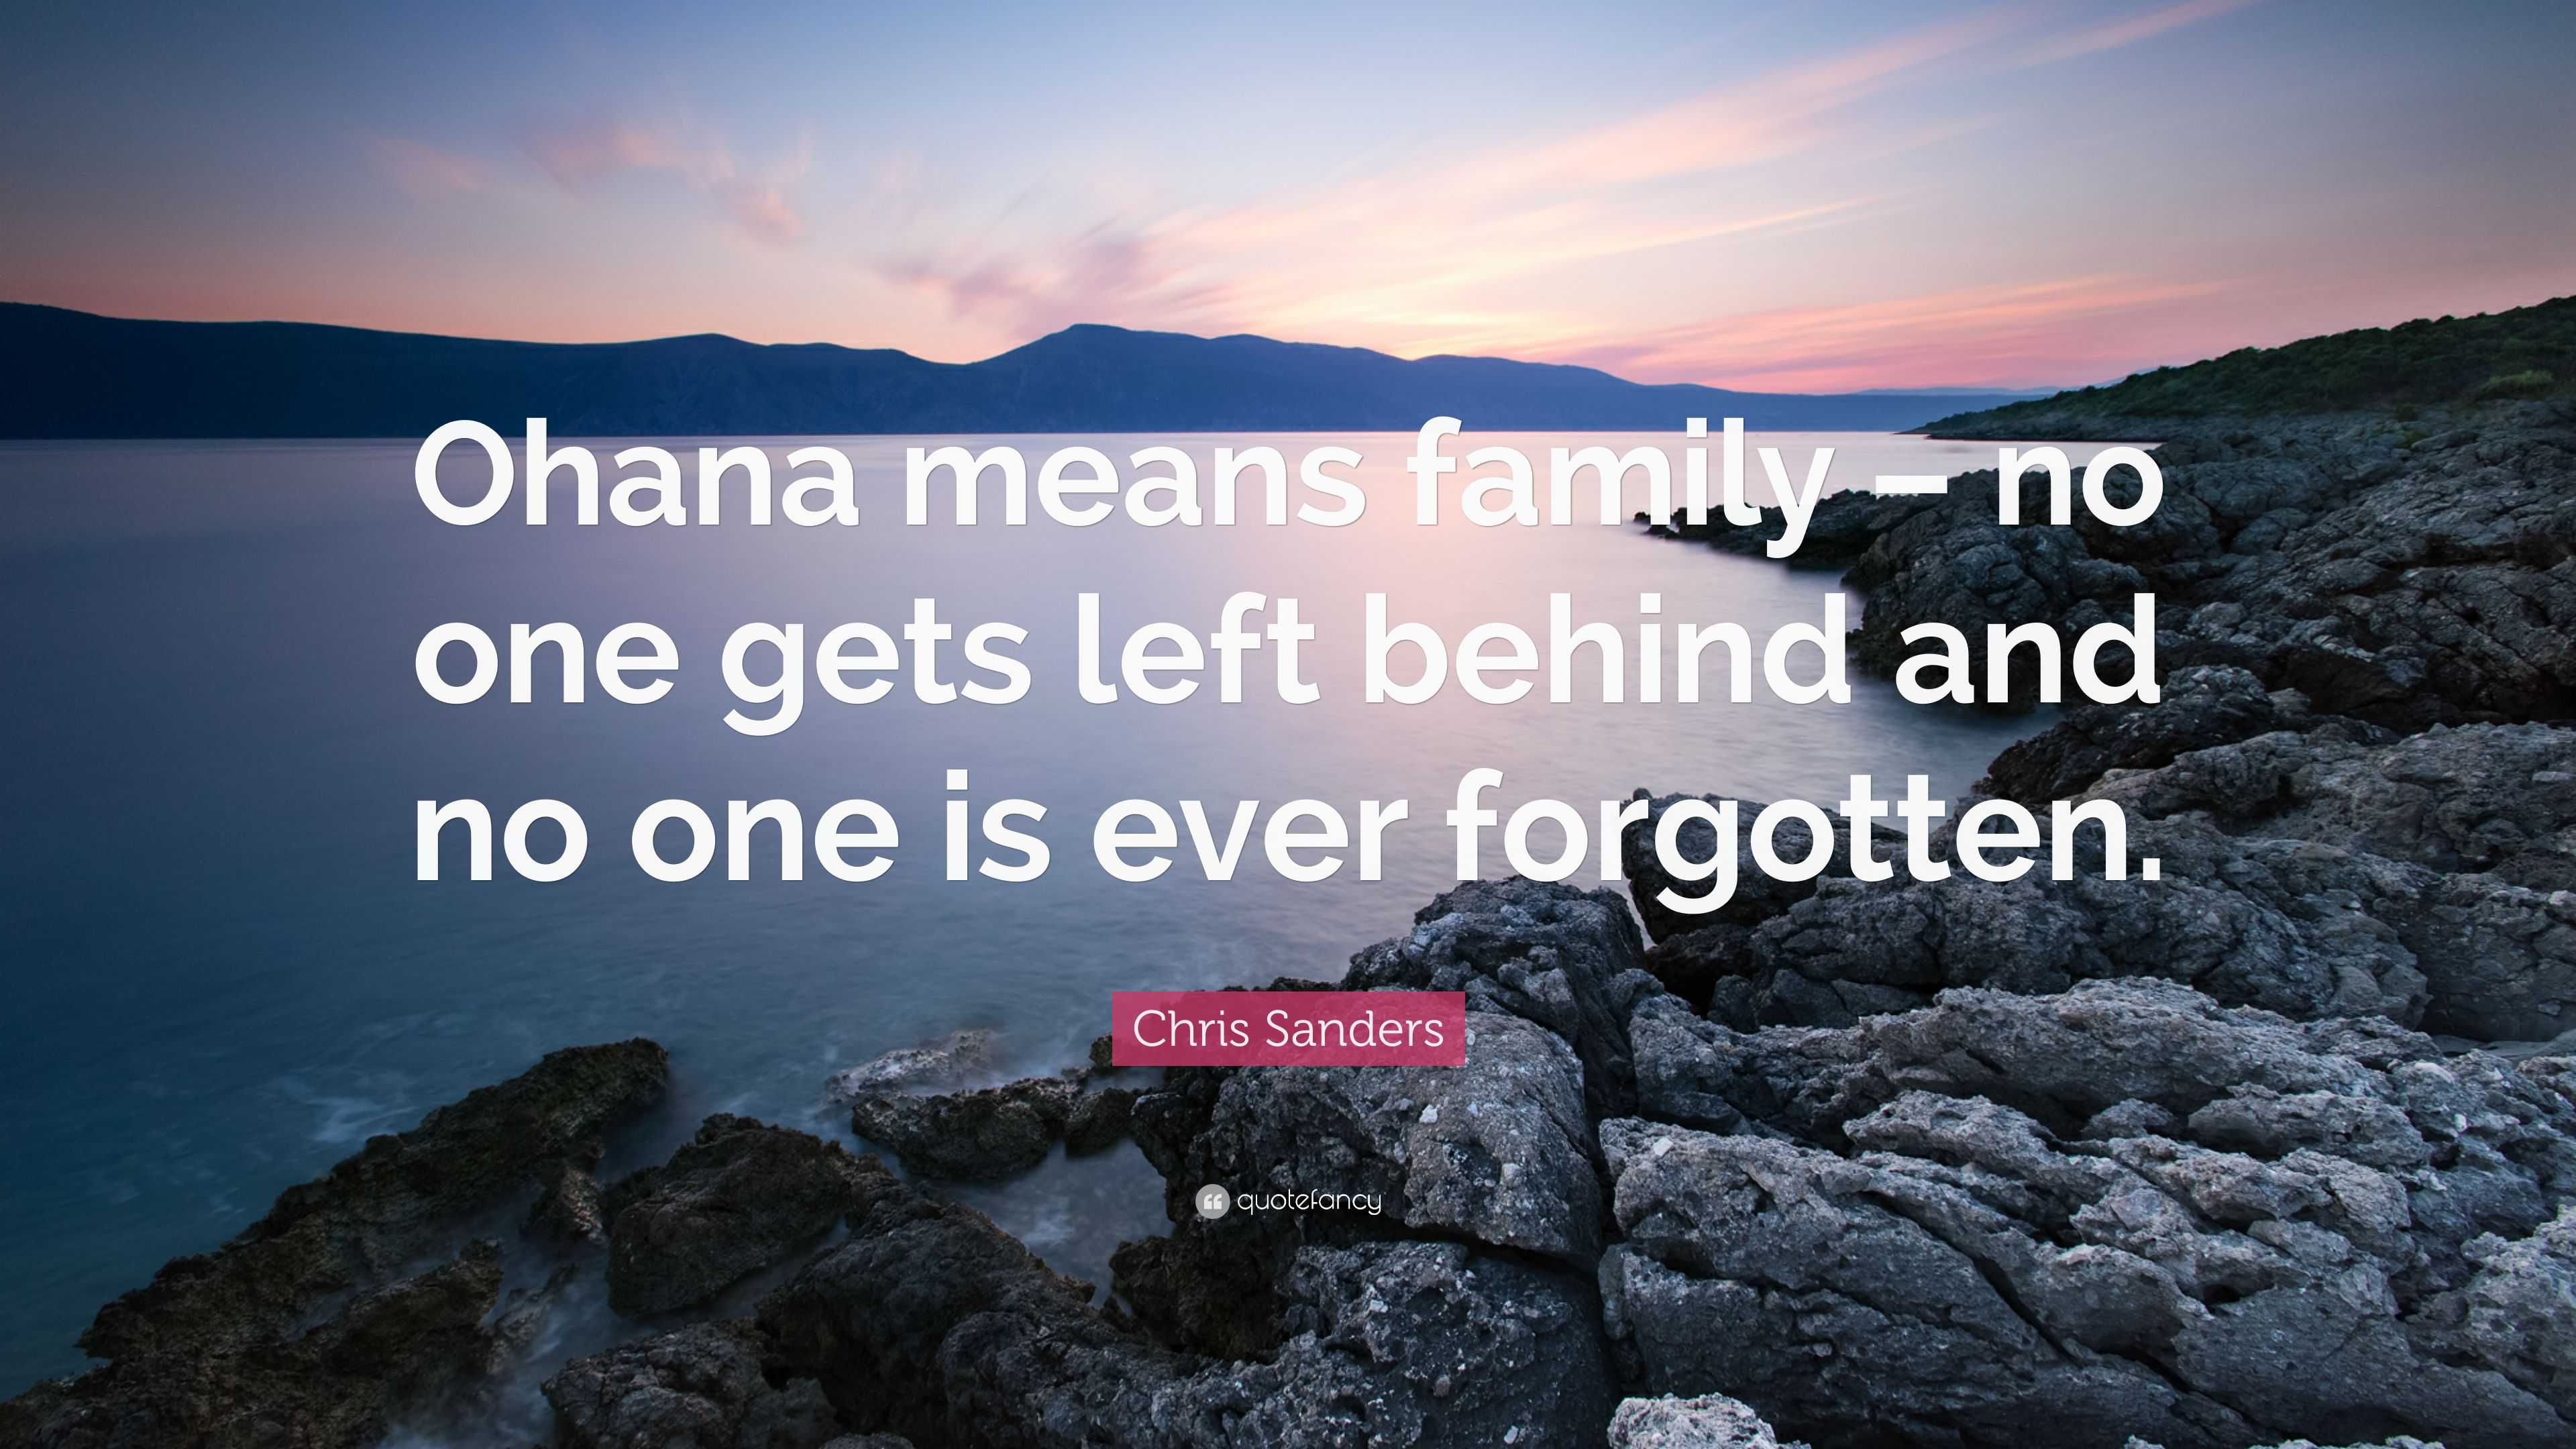 Chris Sanders Quote: “Ohana means family – no one gets left behind and